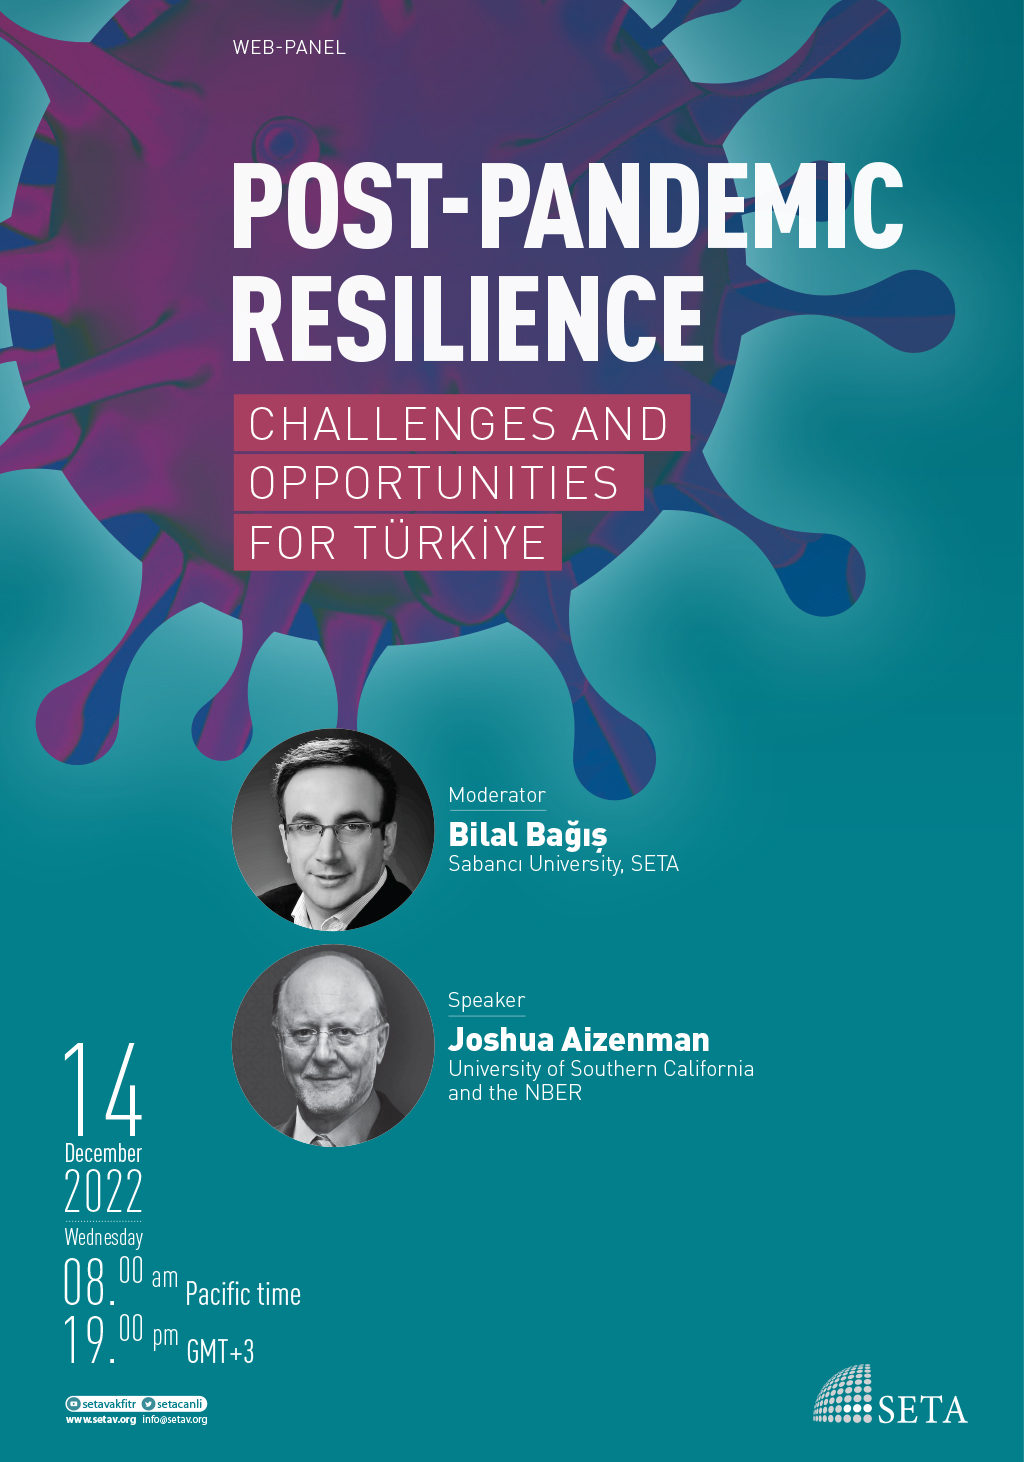 Web Panel: Post-Pandemic Resilience Challenges and Opportunities for Türkiye